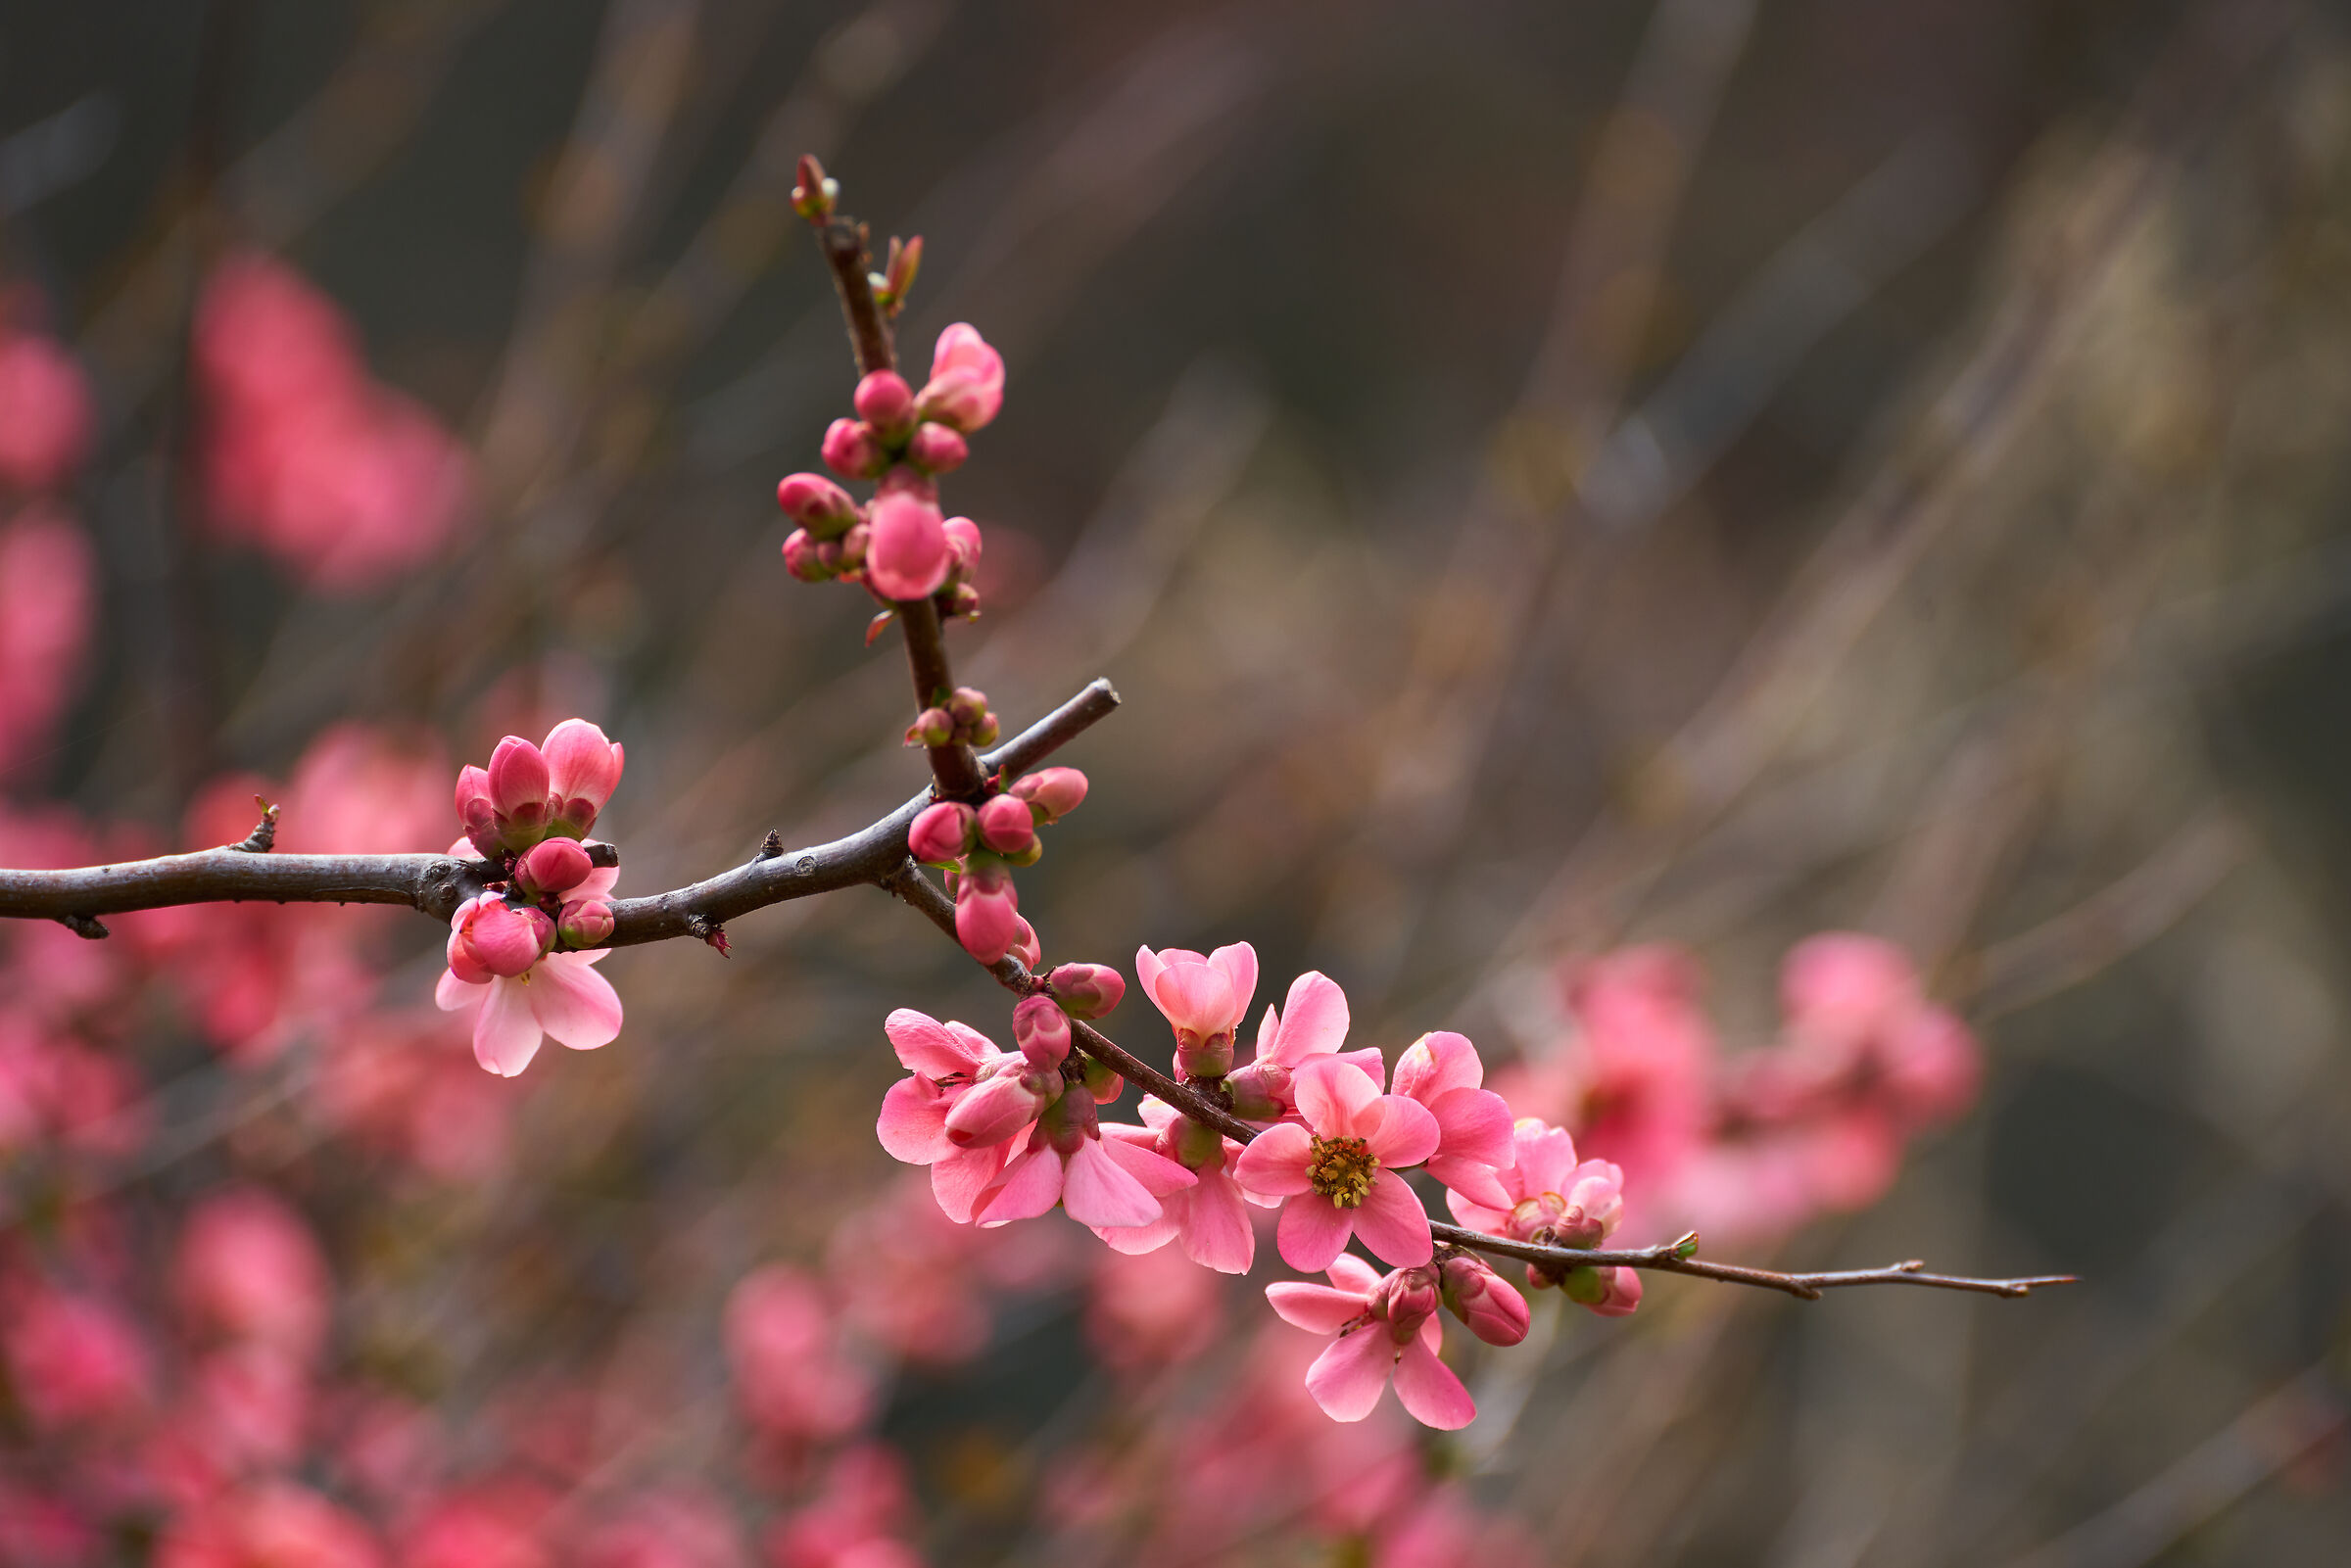 Pink flowers, peach blossoms......